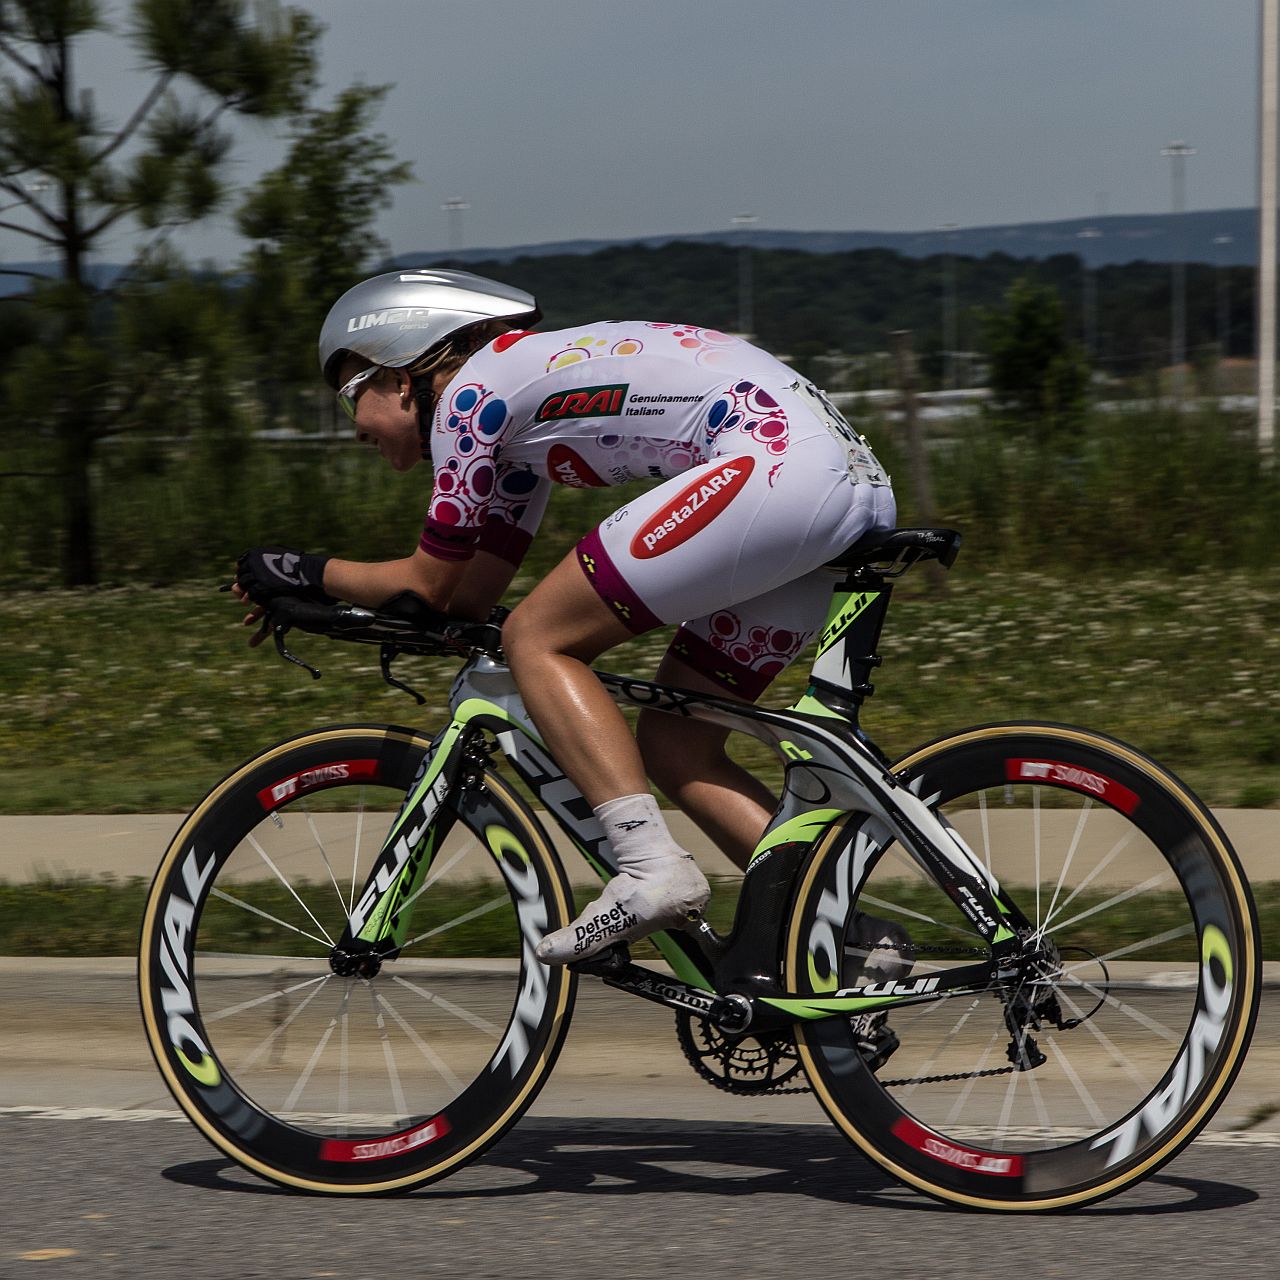 an athlete is racing his bike during the competition